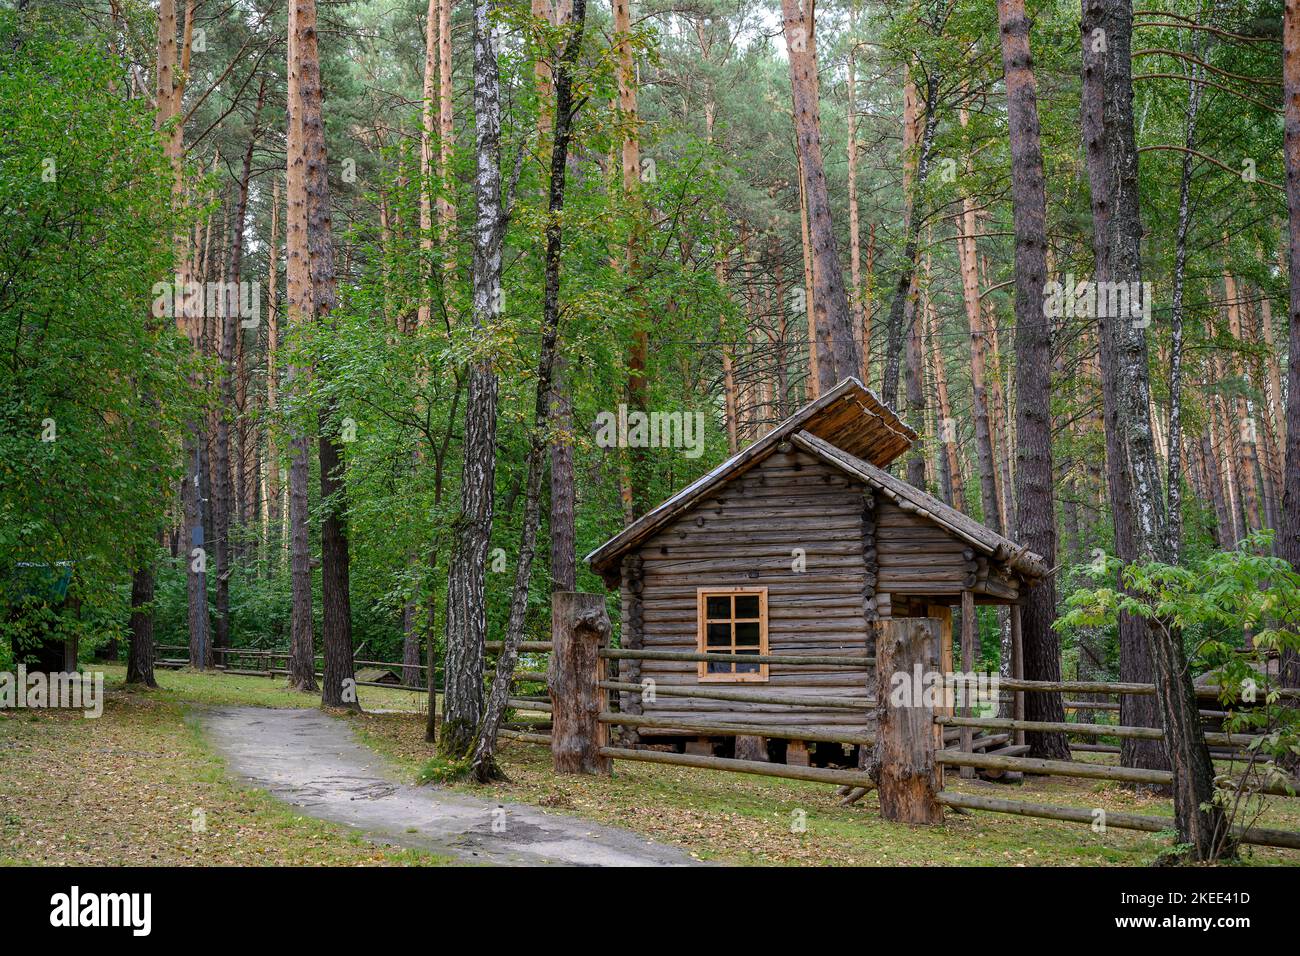 Traditional wooden hut of the 19th century of the Siberian Shortsev people in the forest Stock Photo